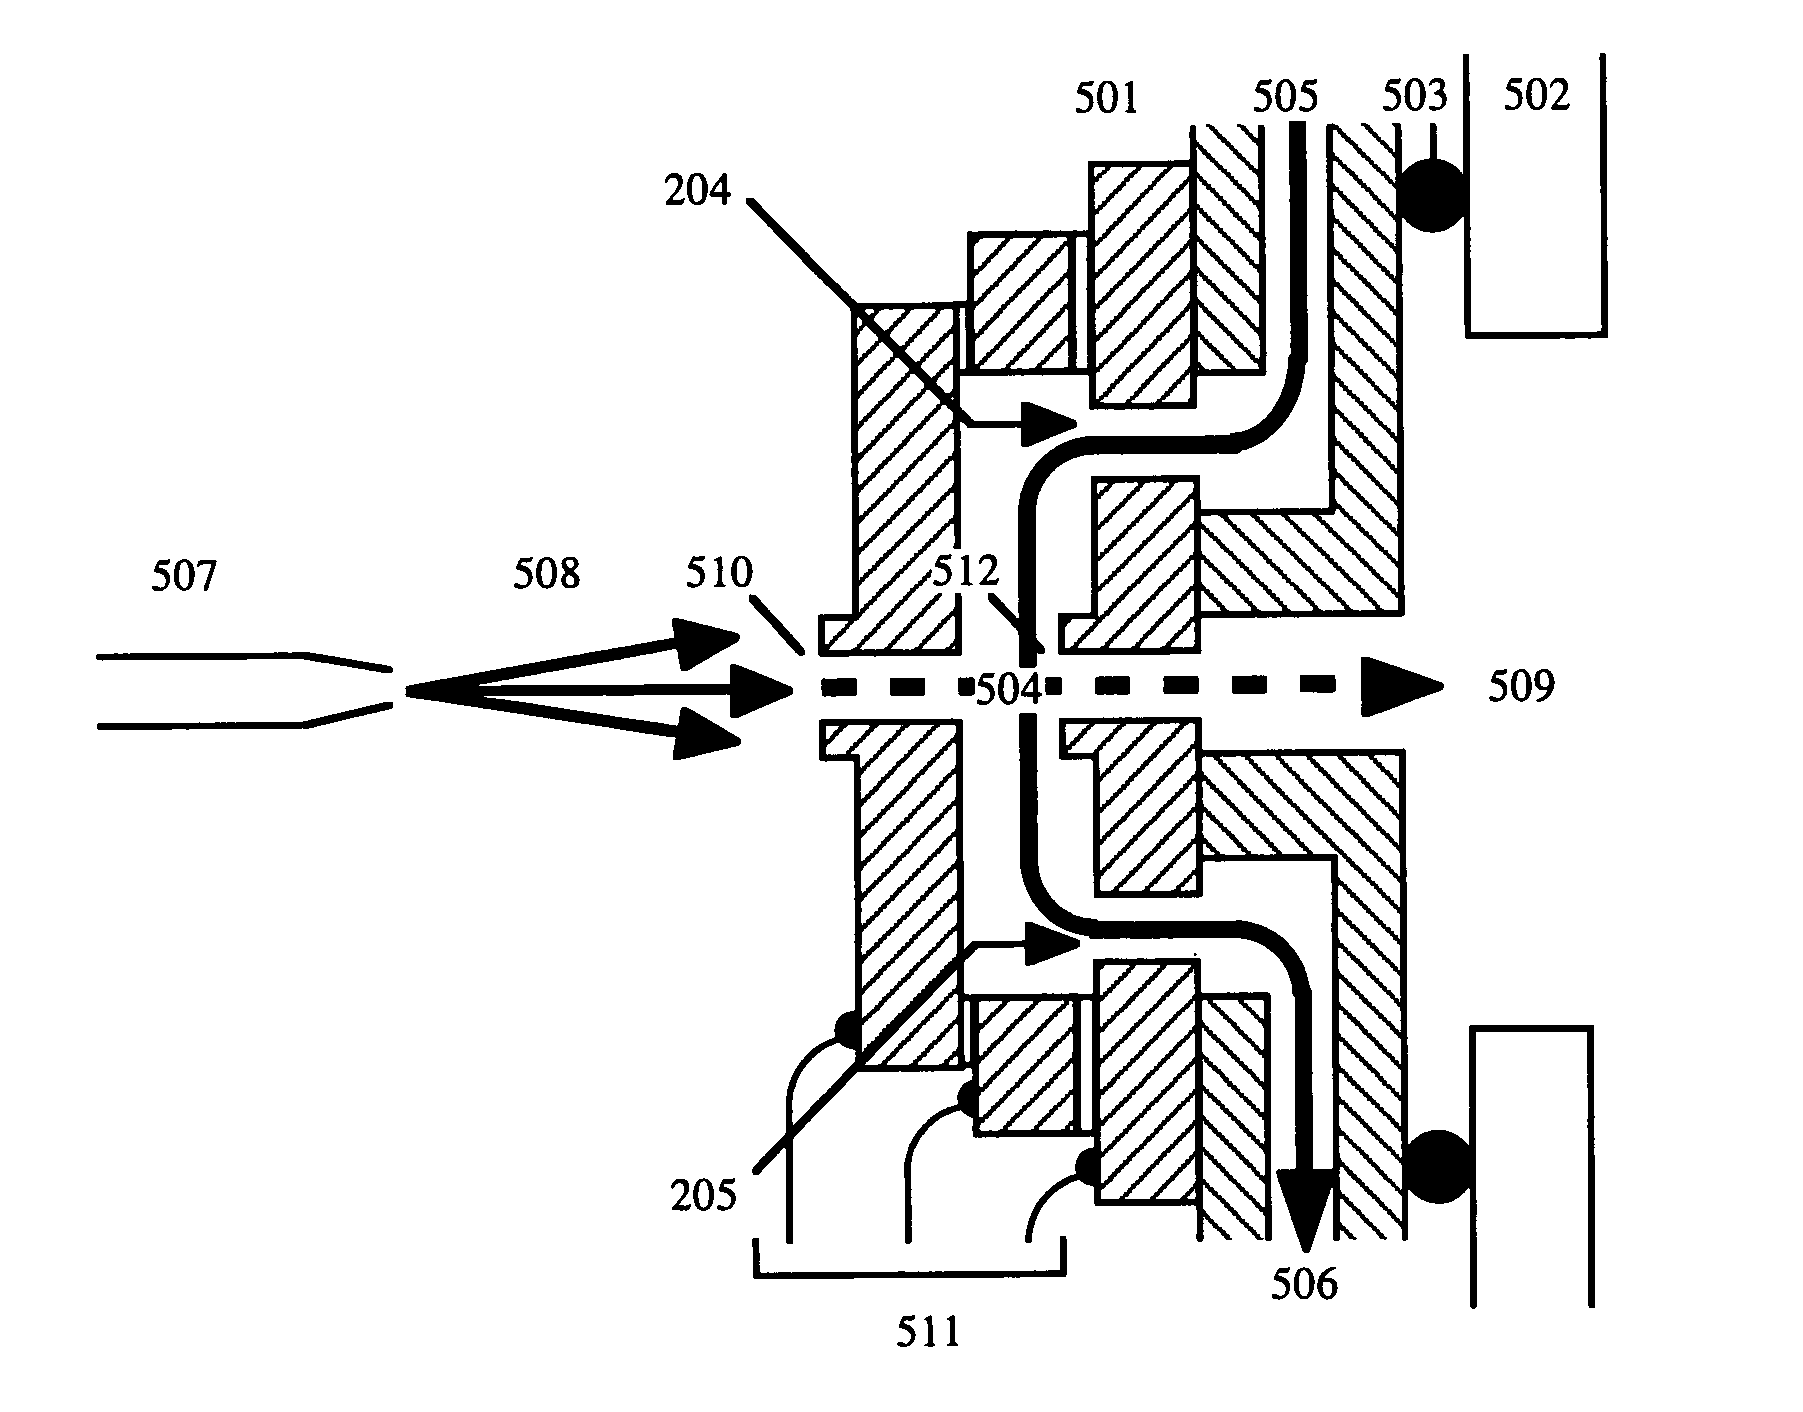 Microengineered vacuum interface for an ionization system